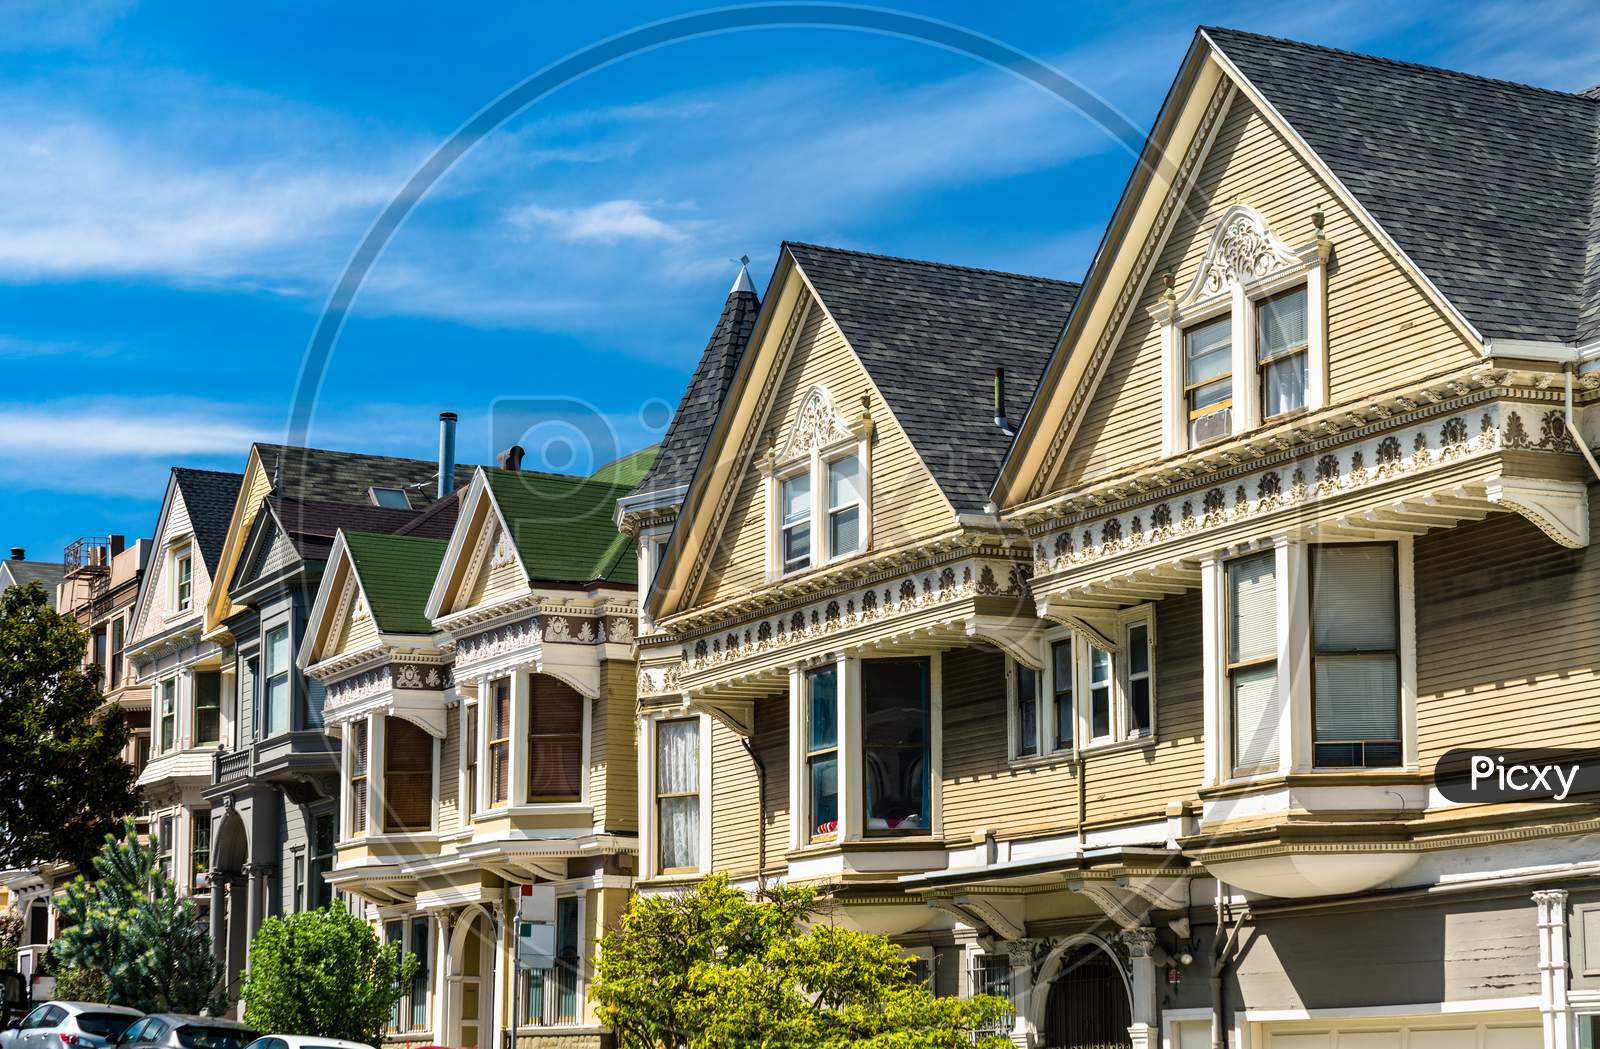 Traditional Victorian Houses In San Francisco, California